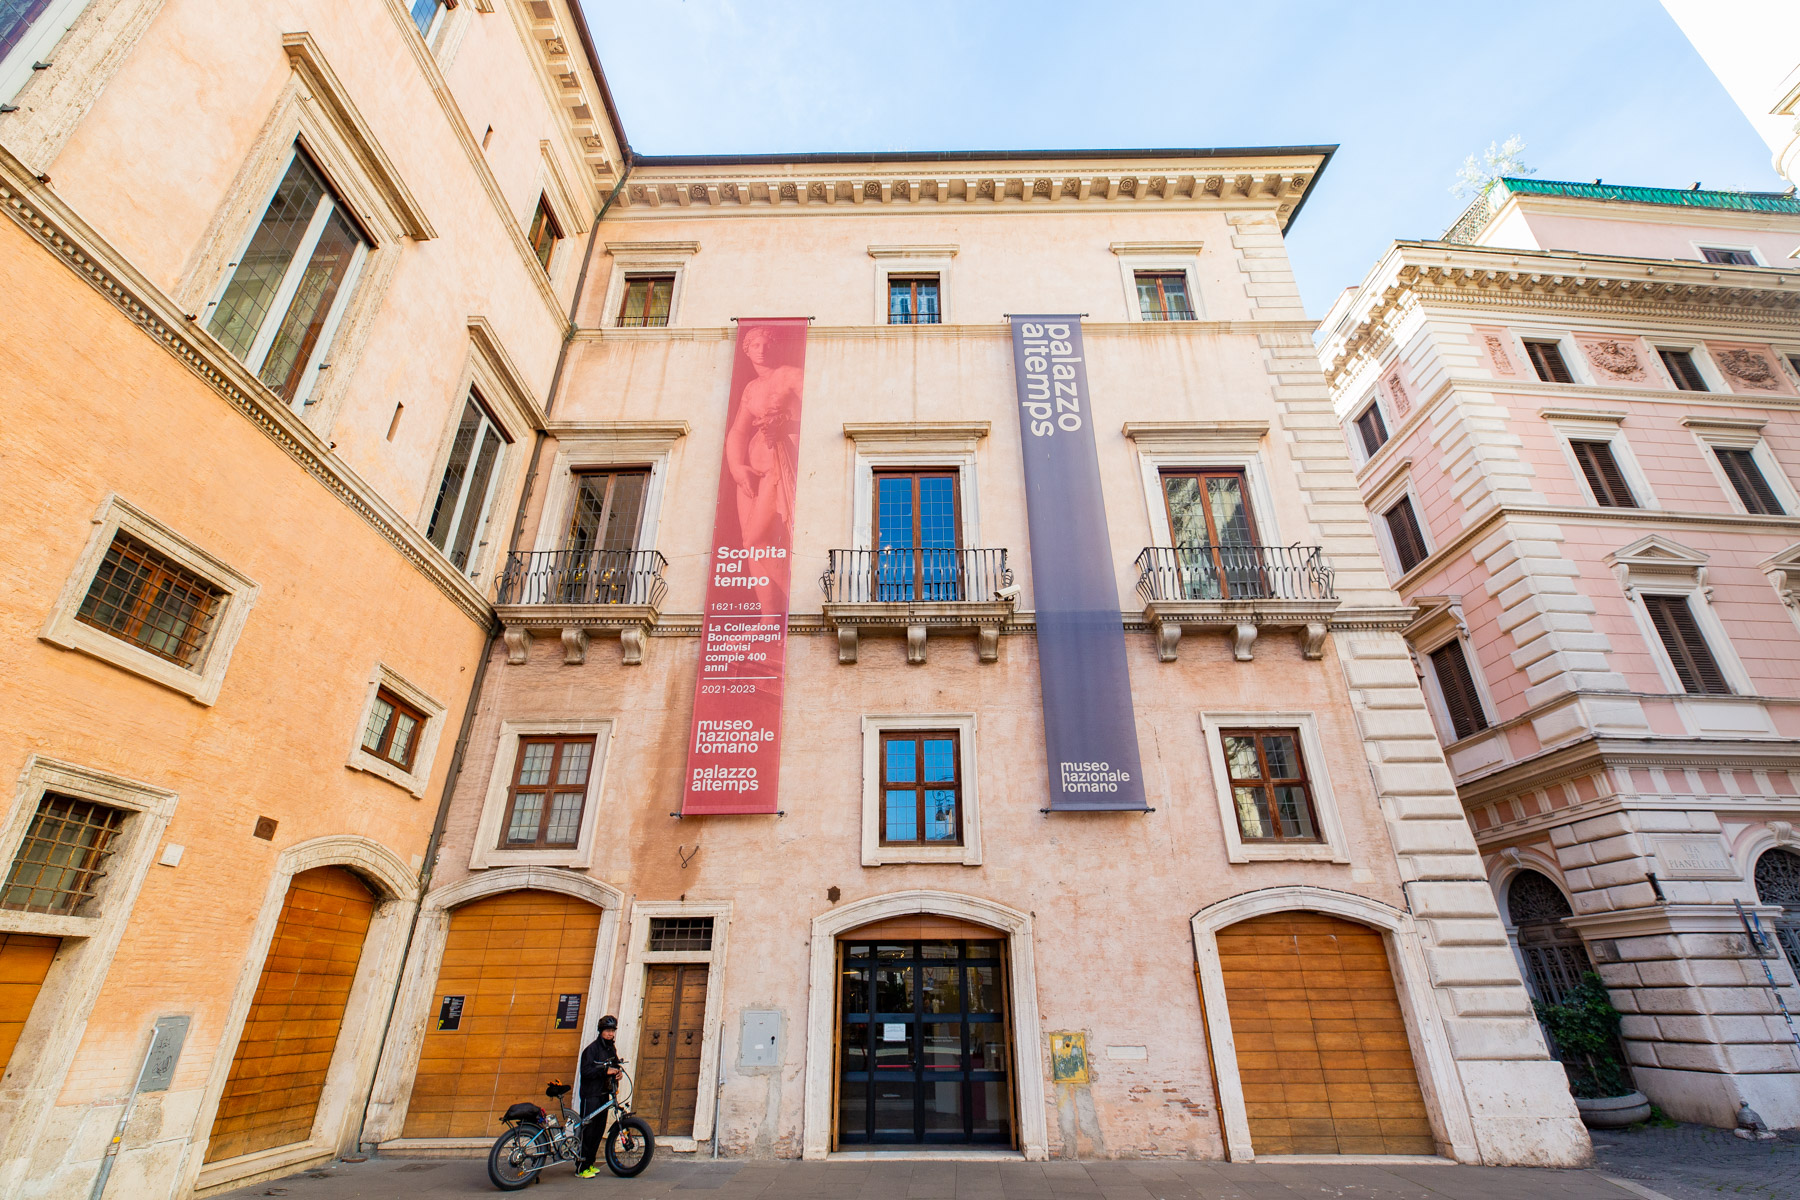 Palazzo Altemps Exterior
Best Museums Rome